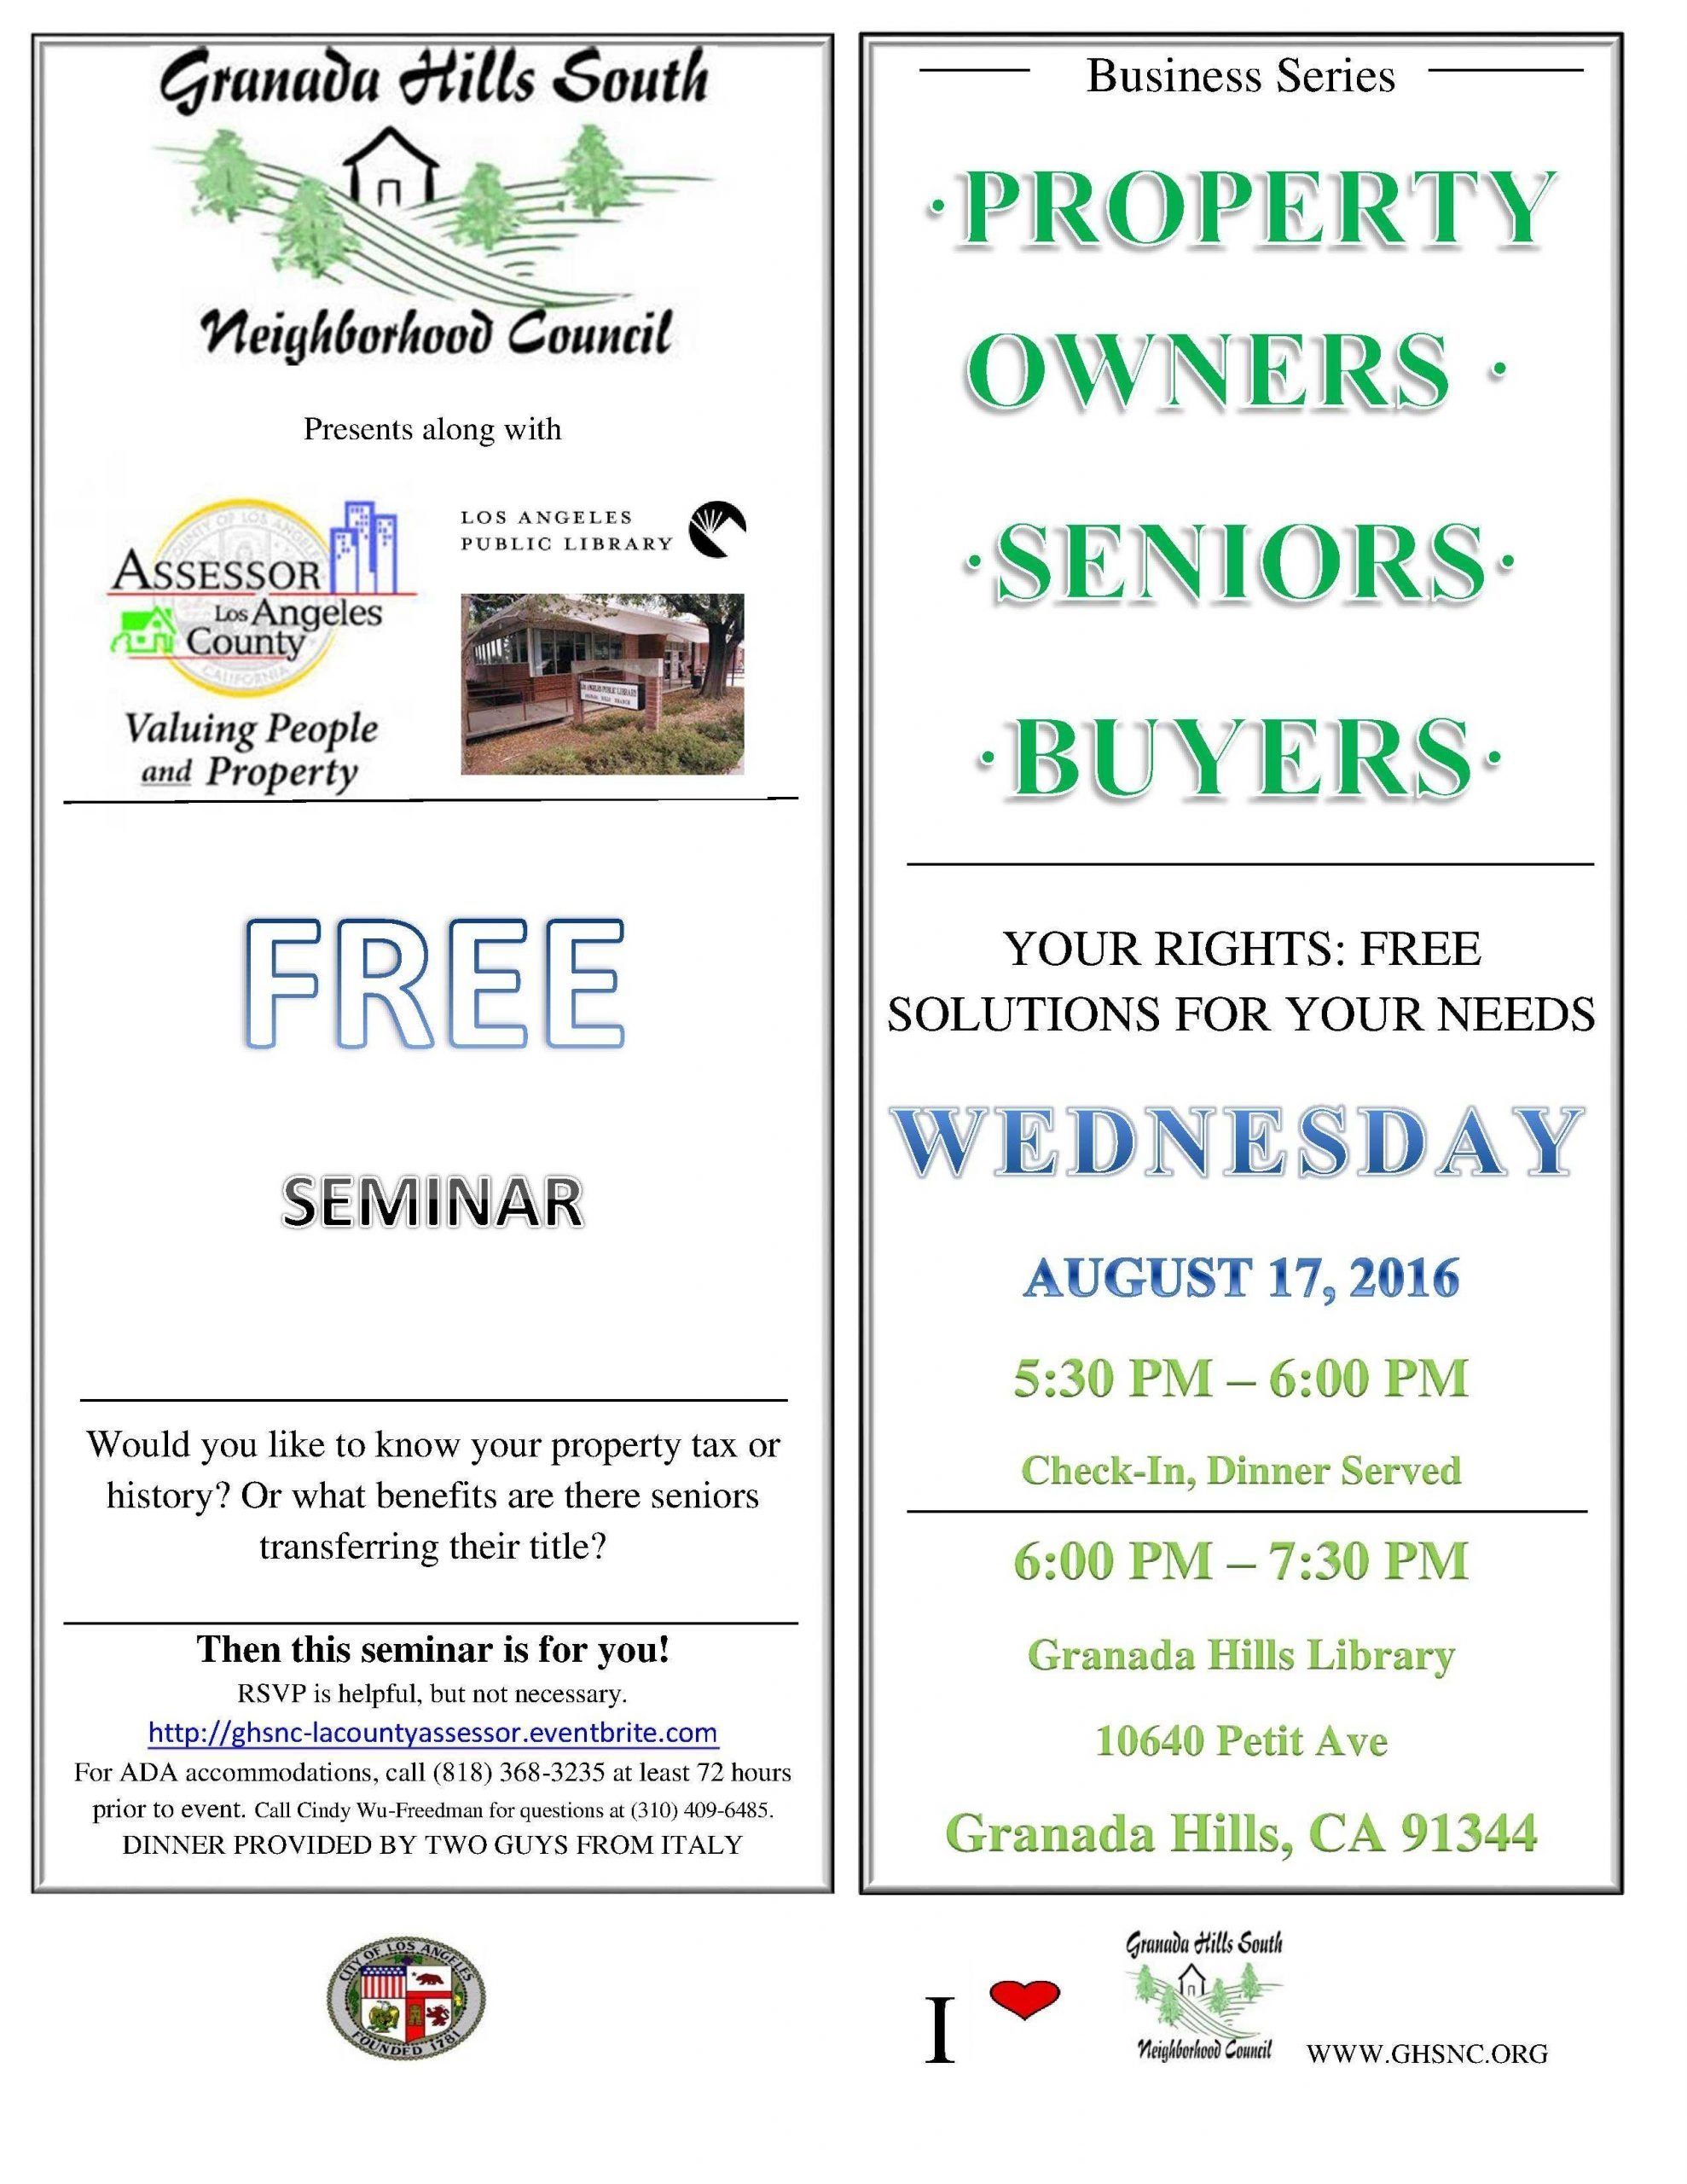 GHSNC Business Series Event for Property Owners, Seniors, and Buyers